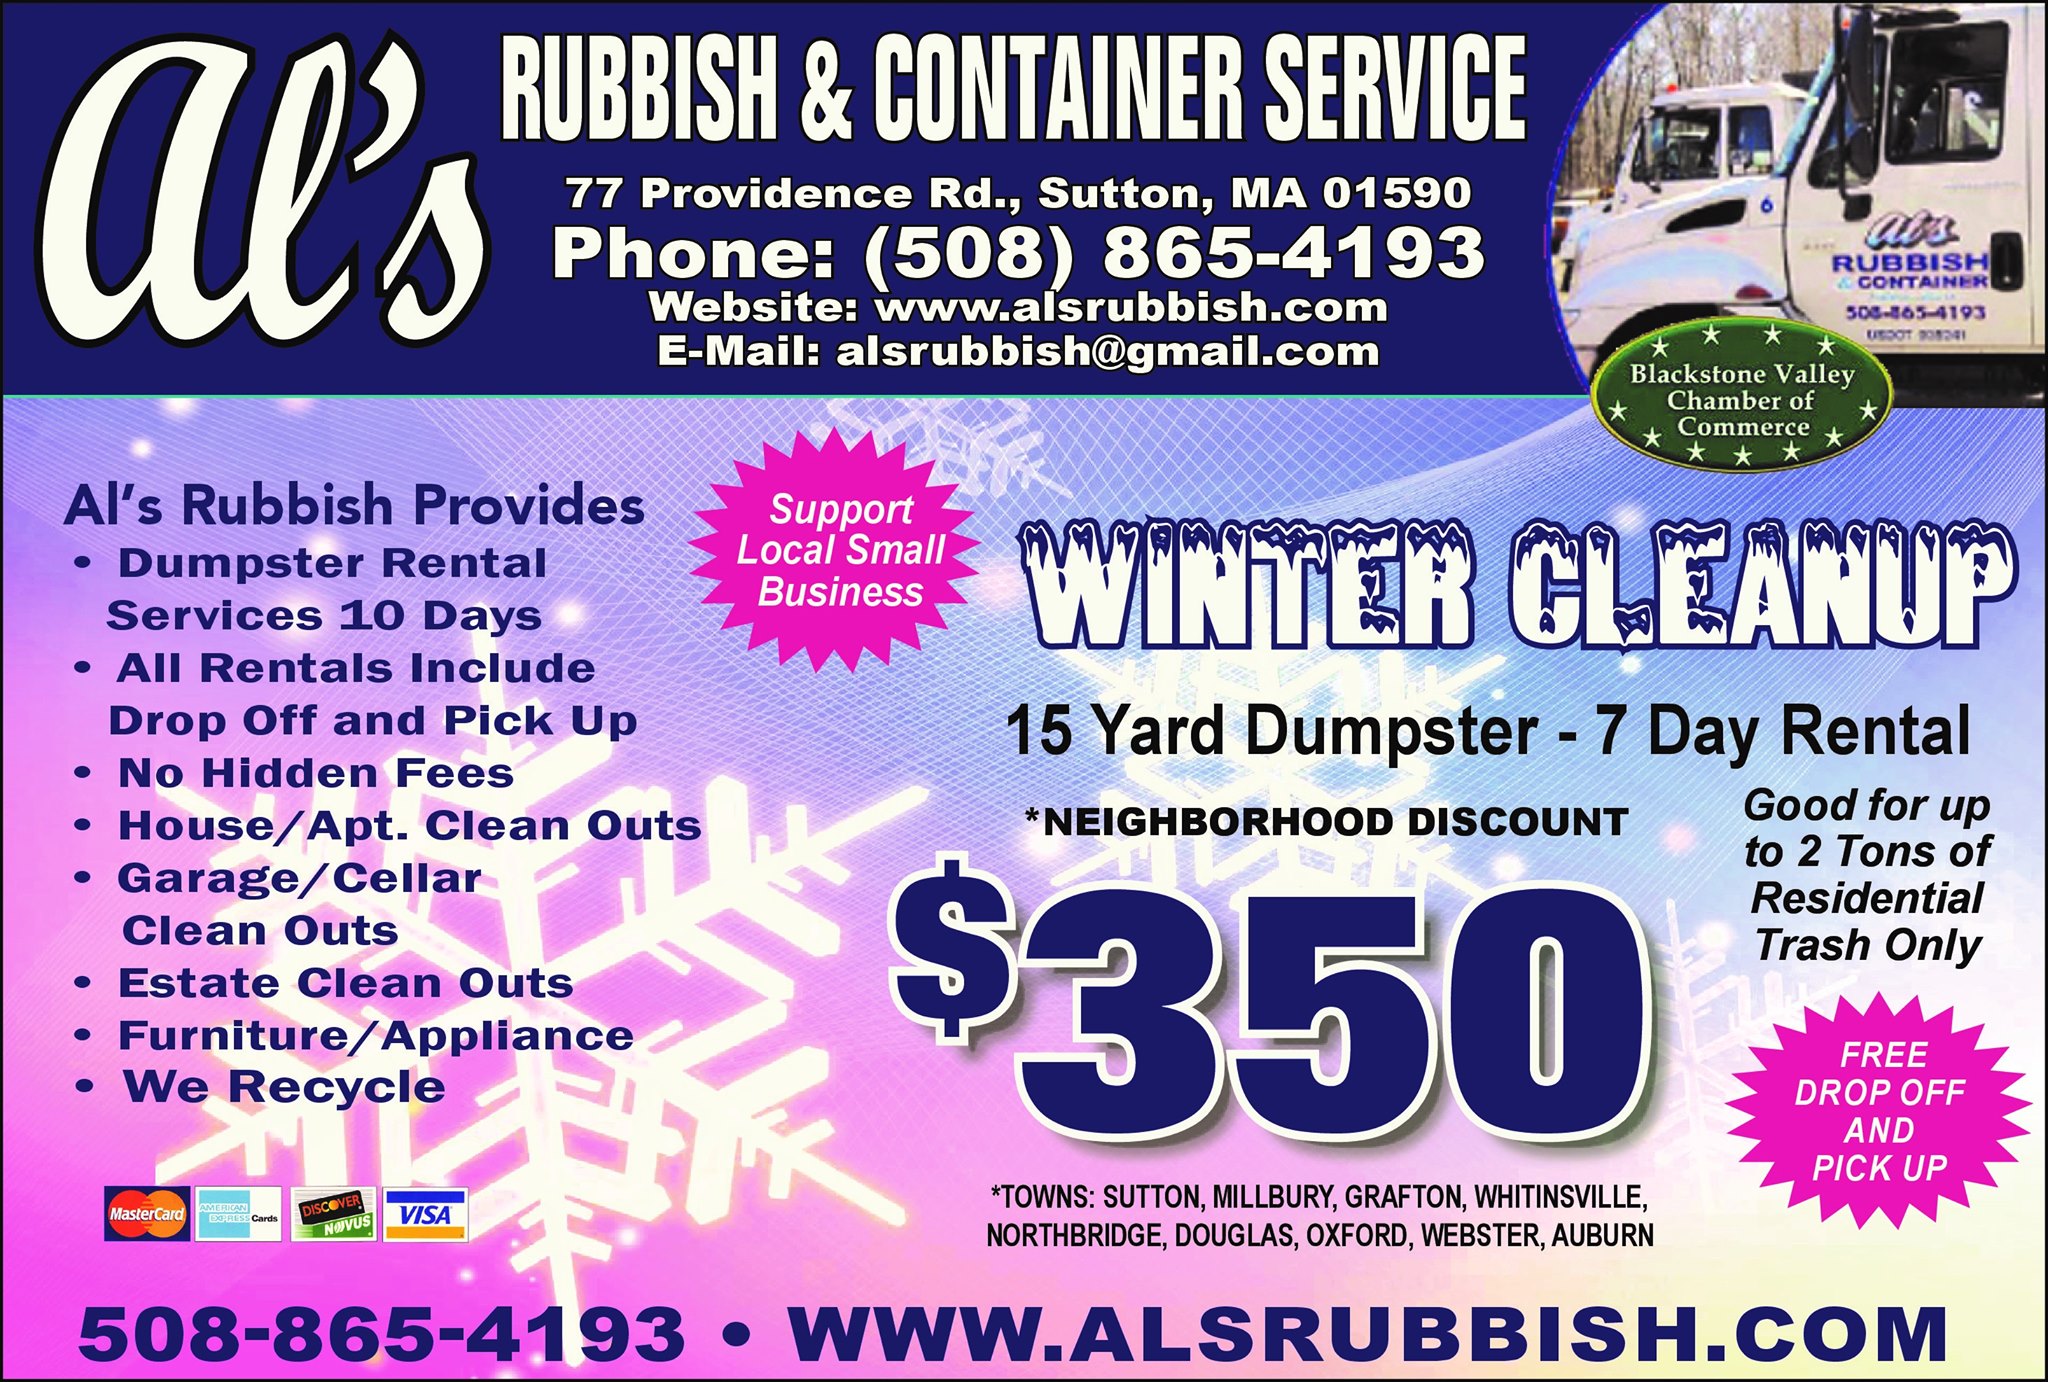 See our Winter Cleanup special pricing!